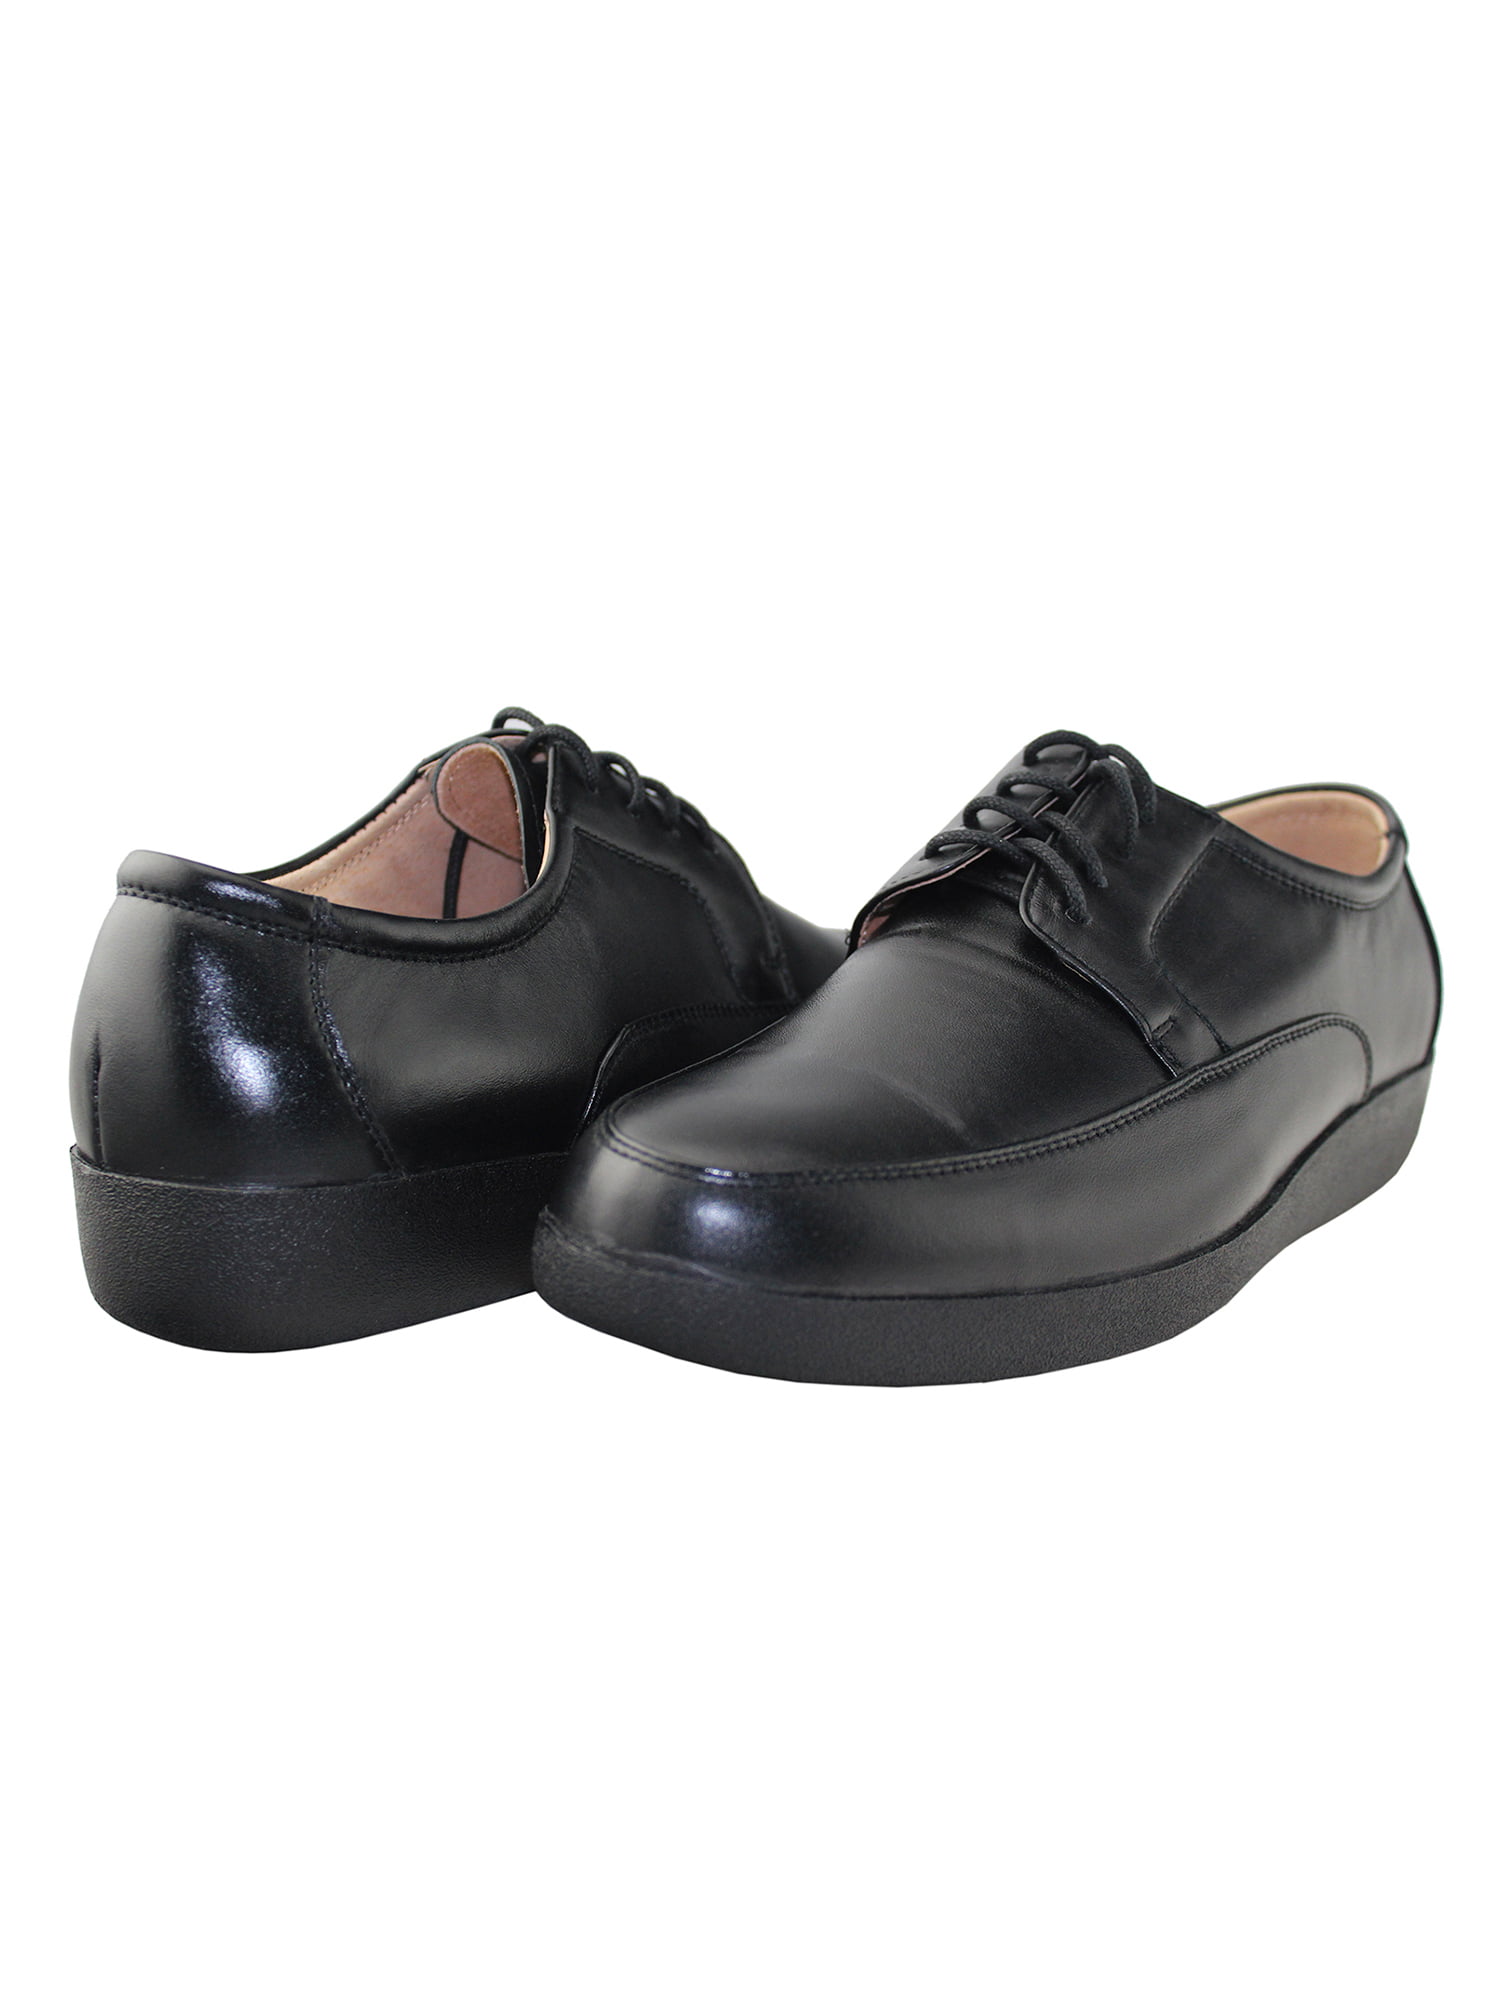 Mens Oxford Glove Leather Shoes 